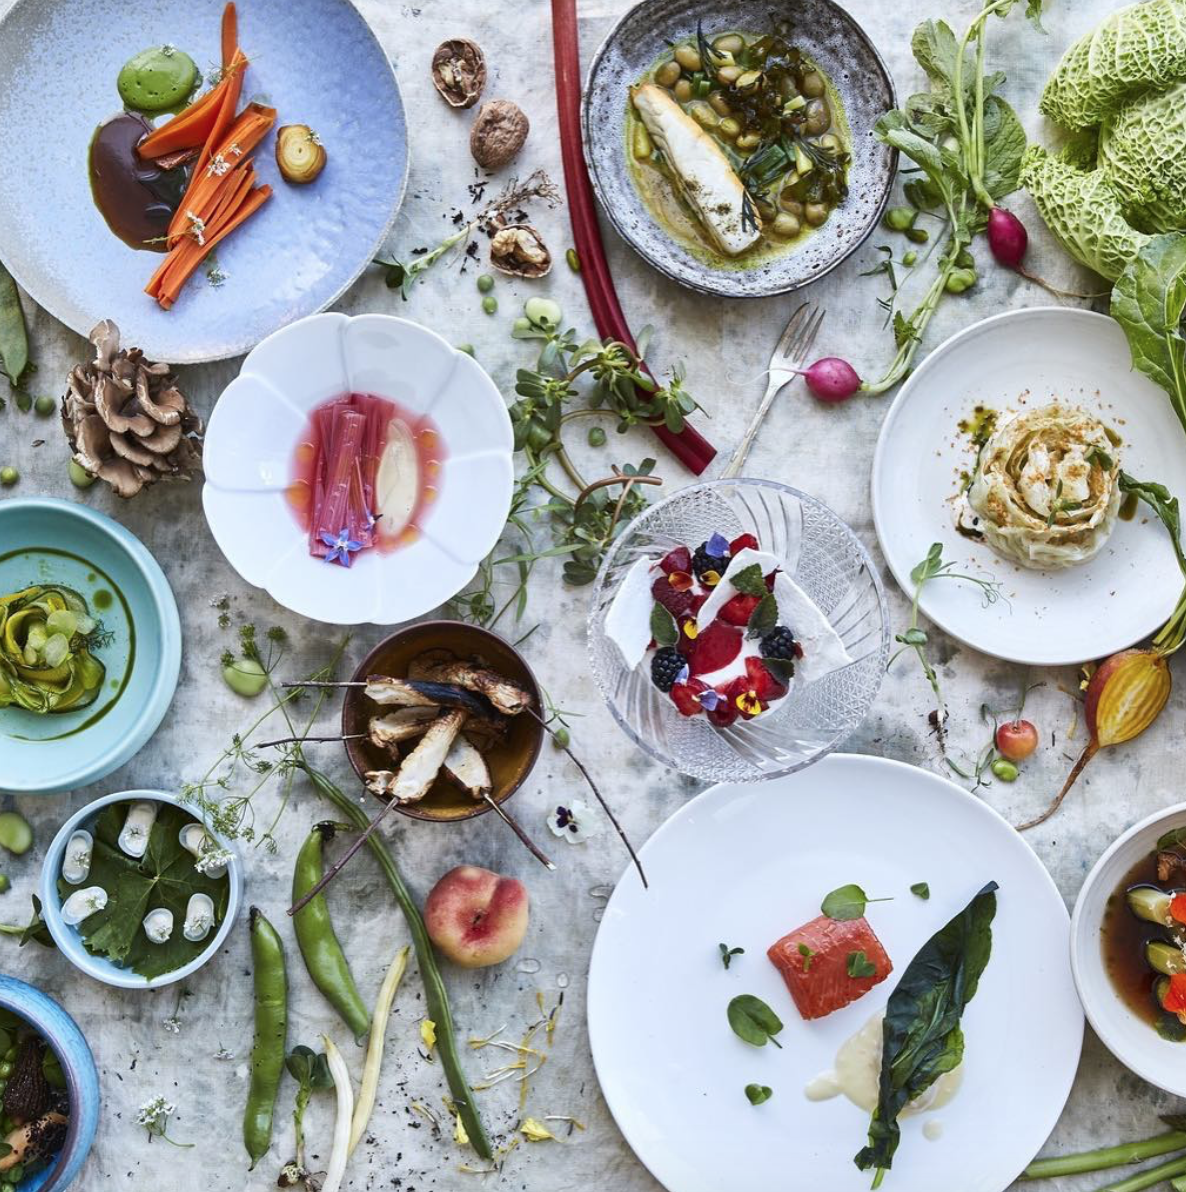 5 Surprising Ways That A Private Chef Can Change Your Life